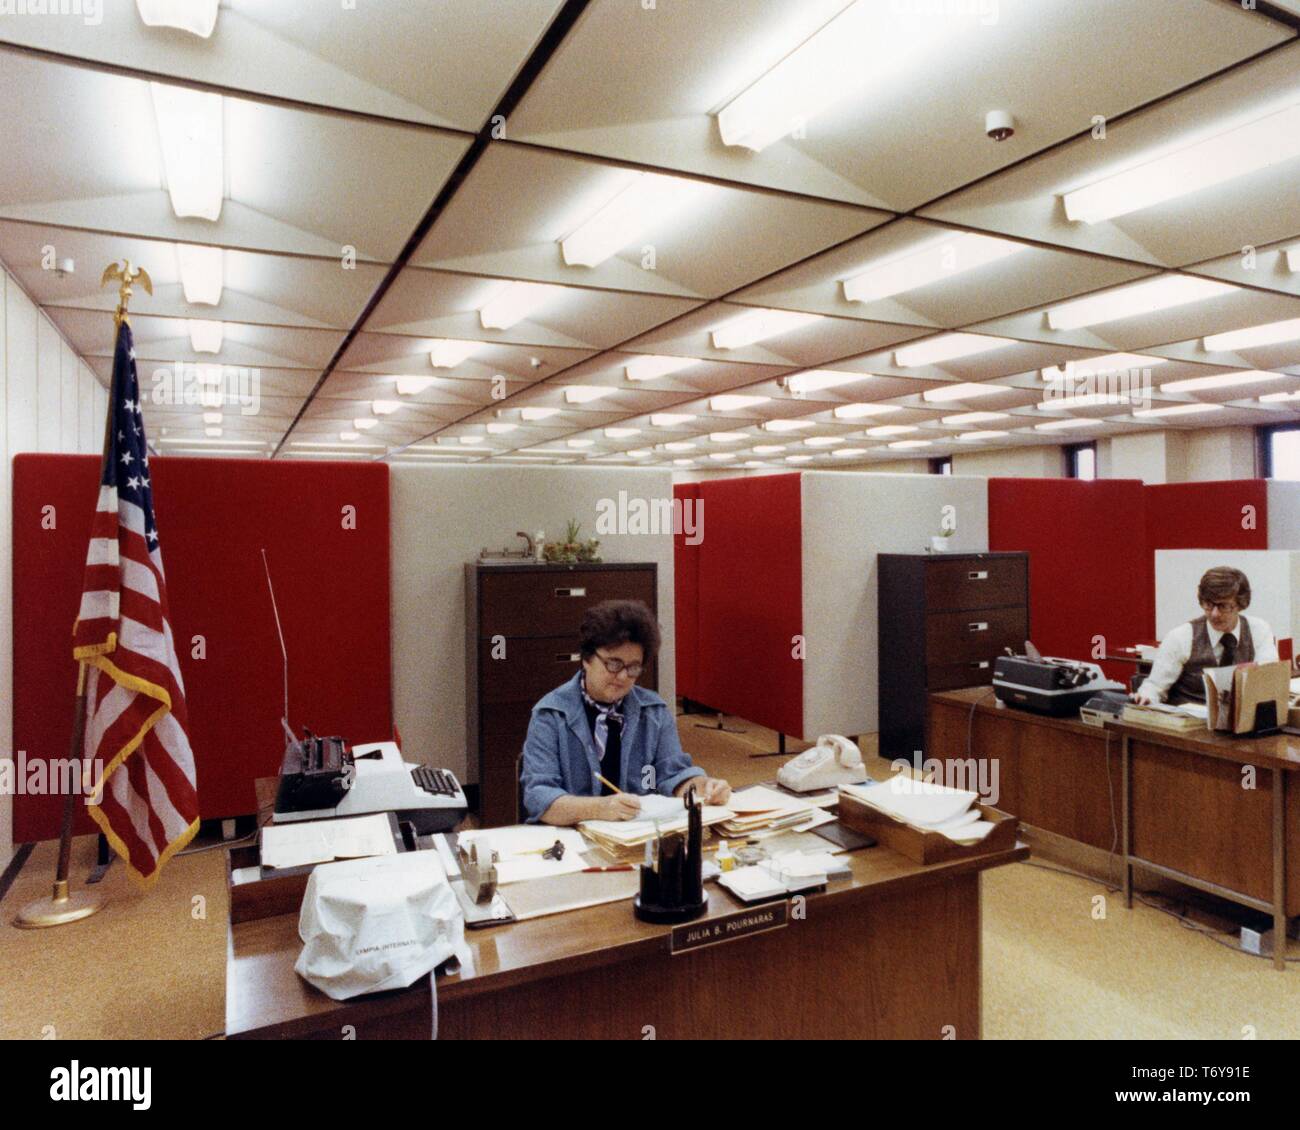 Employees, including Julia B Pournaras, work at their desks underneath energy efficient track lighting at the Norris Cotton Federal Building, Manchester, New Hampshire, 1975. Image courtesy US Department of Energy. () Stock Photo